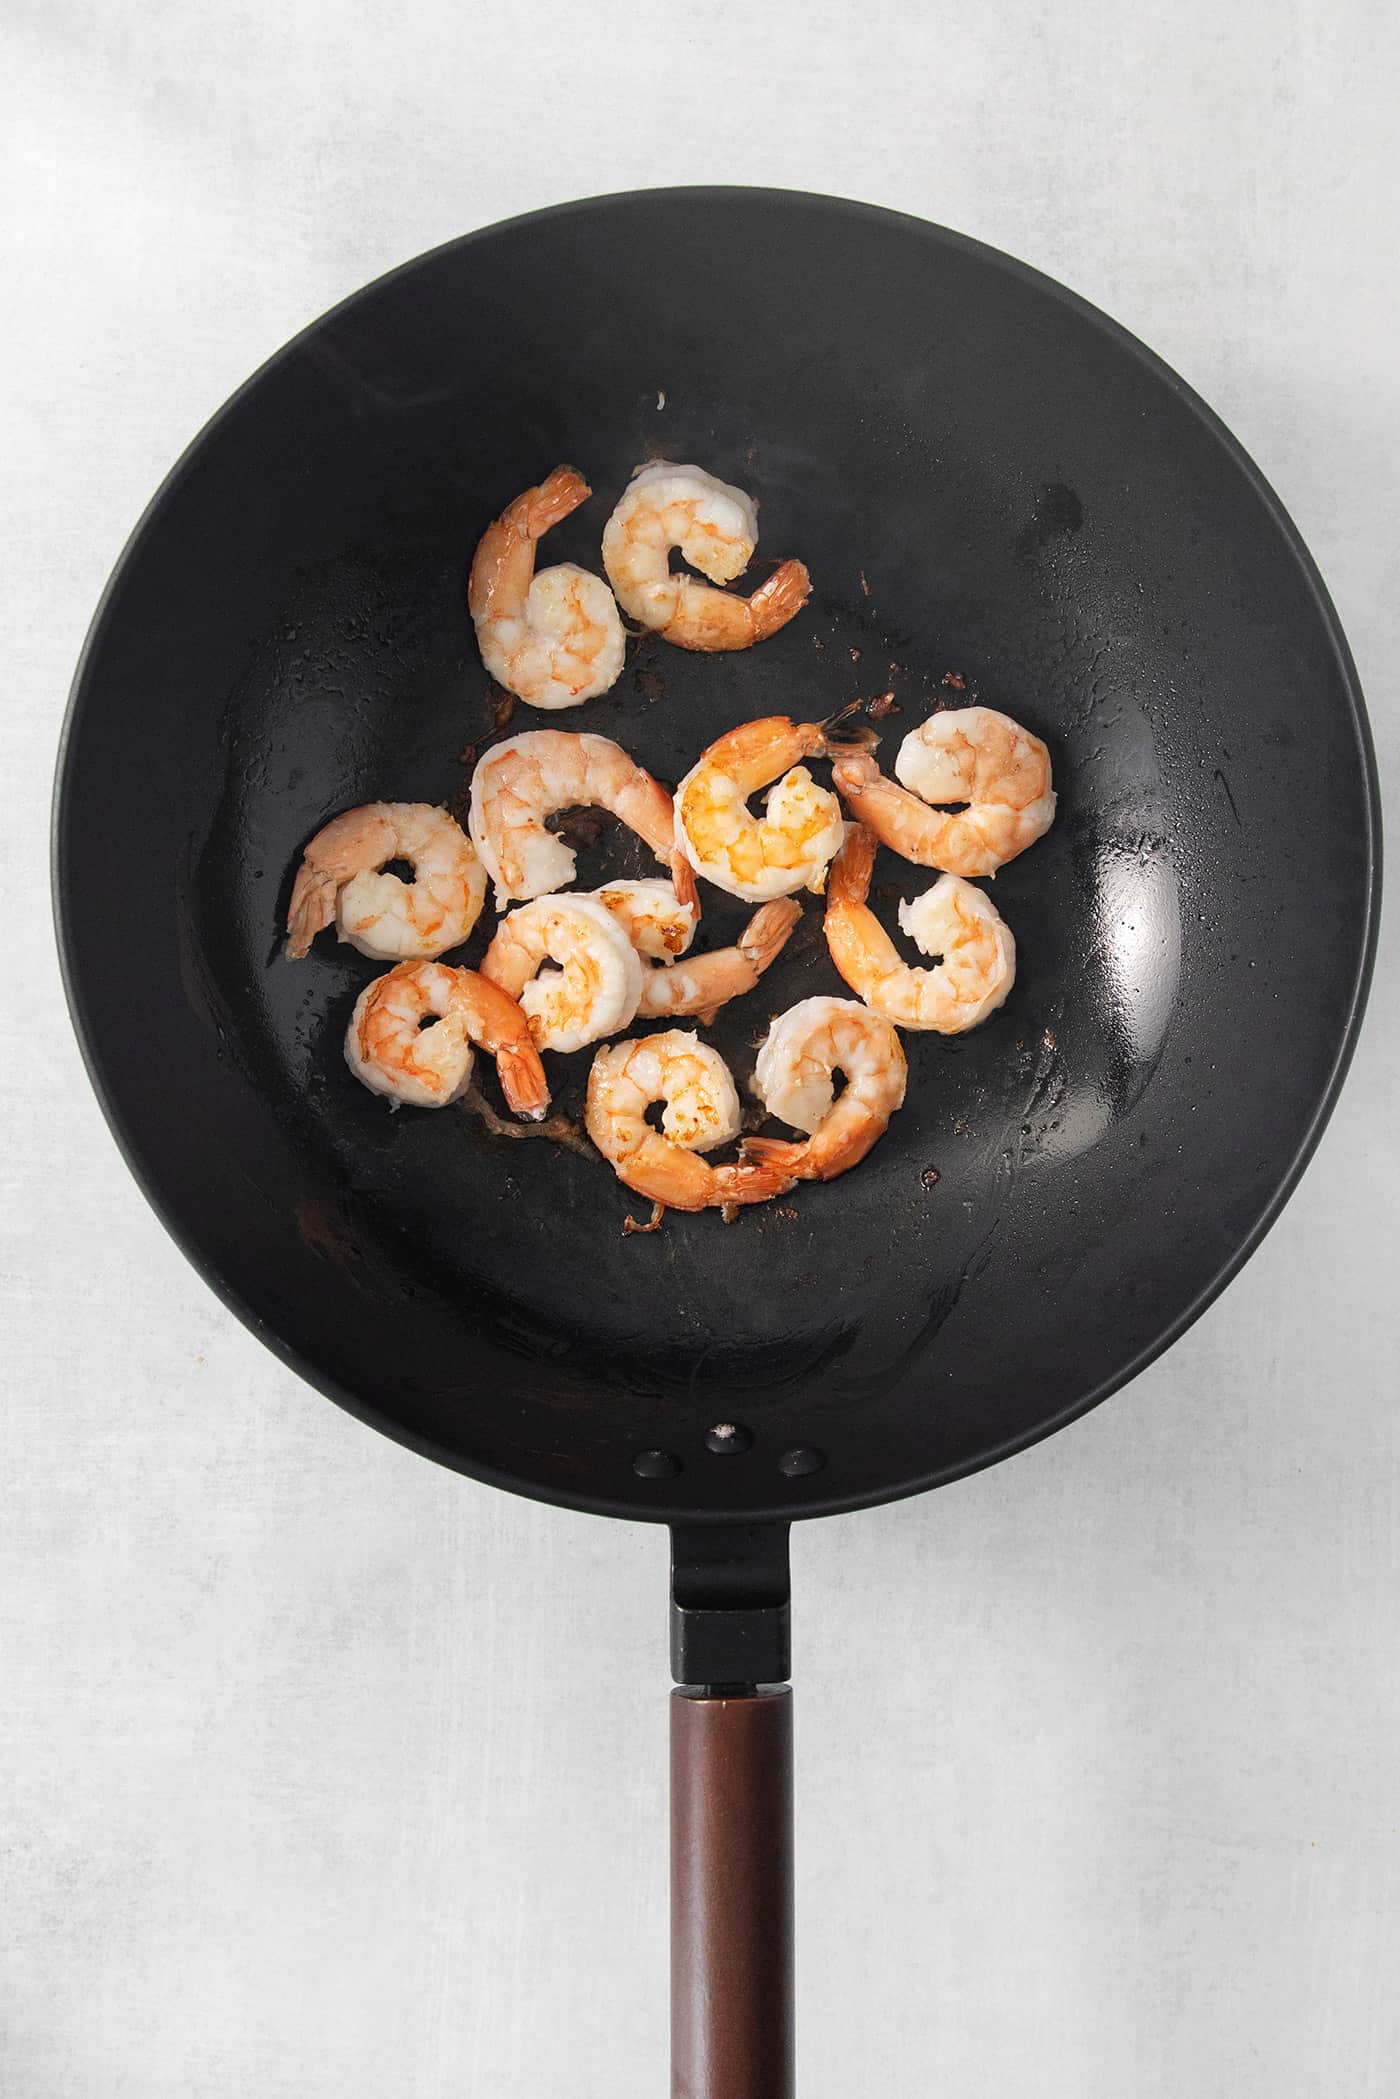 A black skillet in which shrimp cooks.